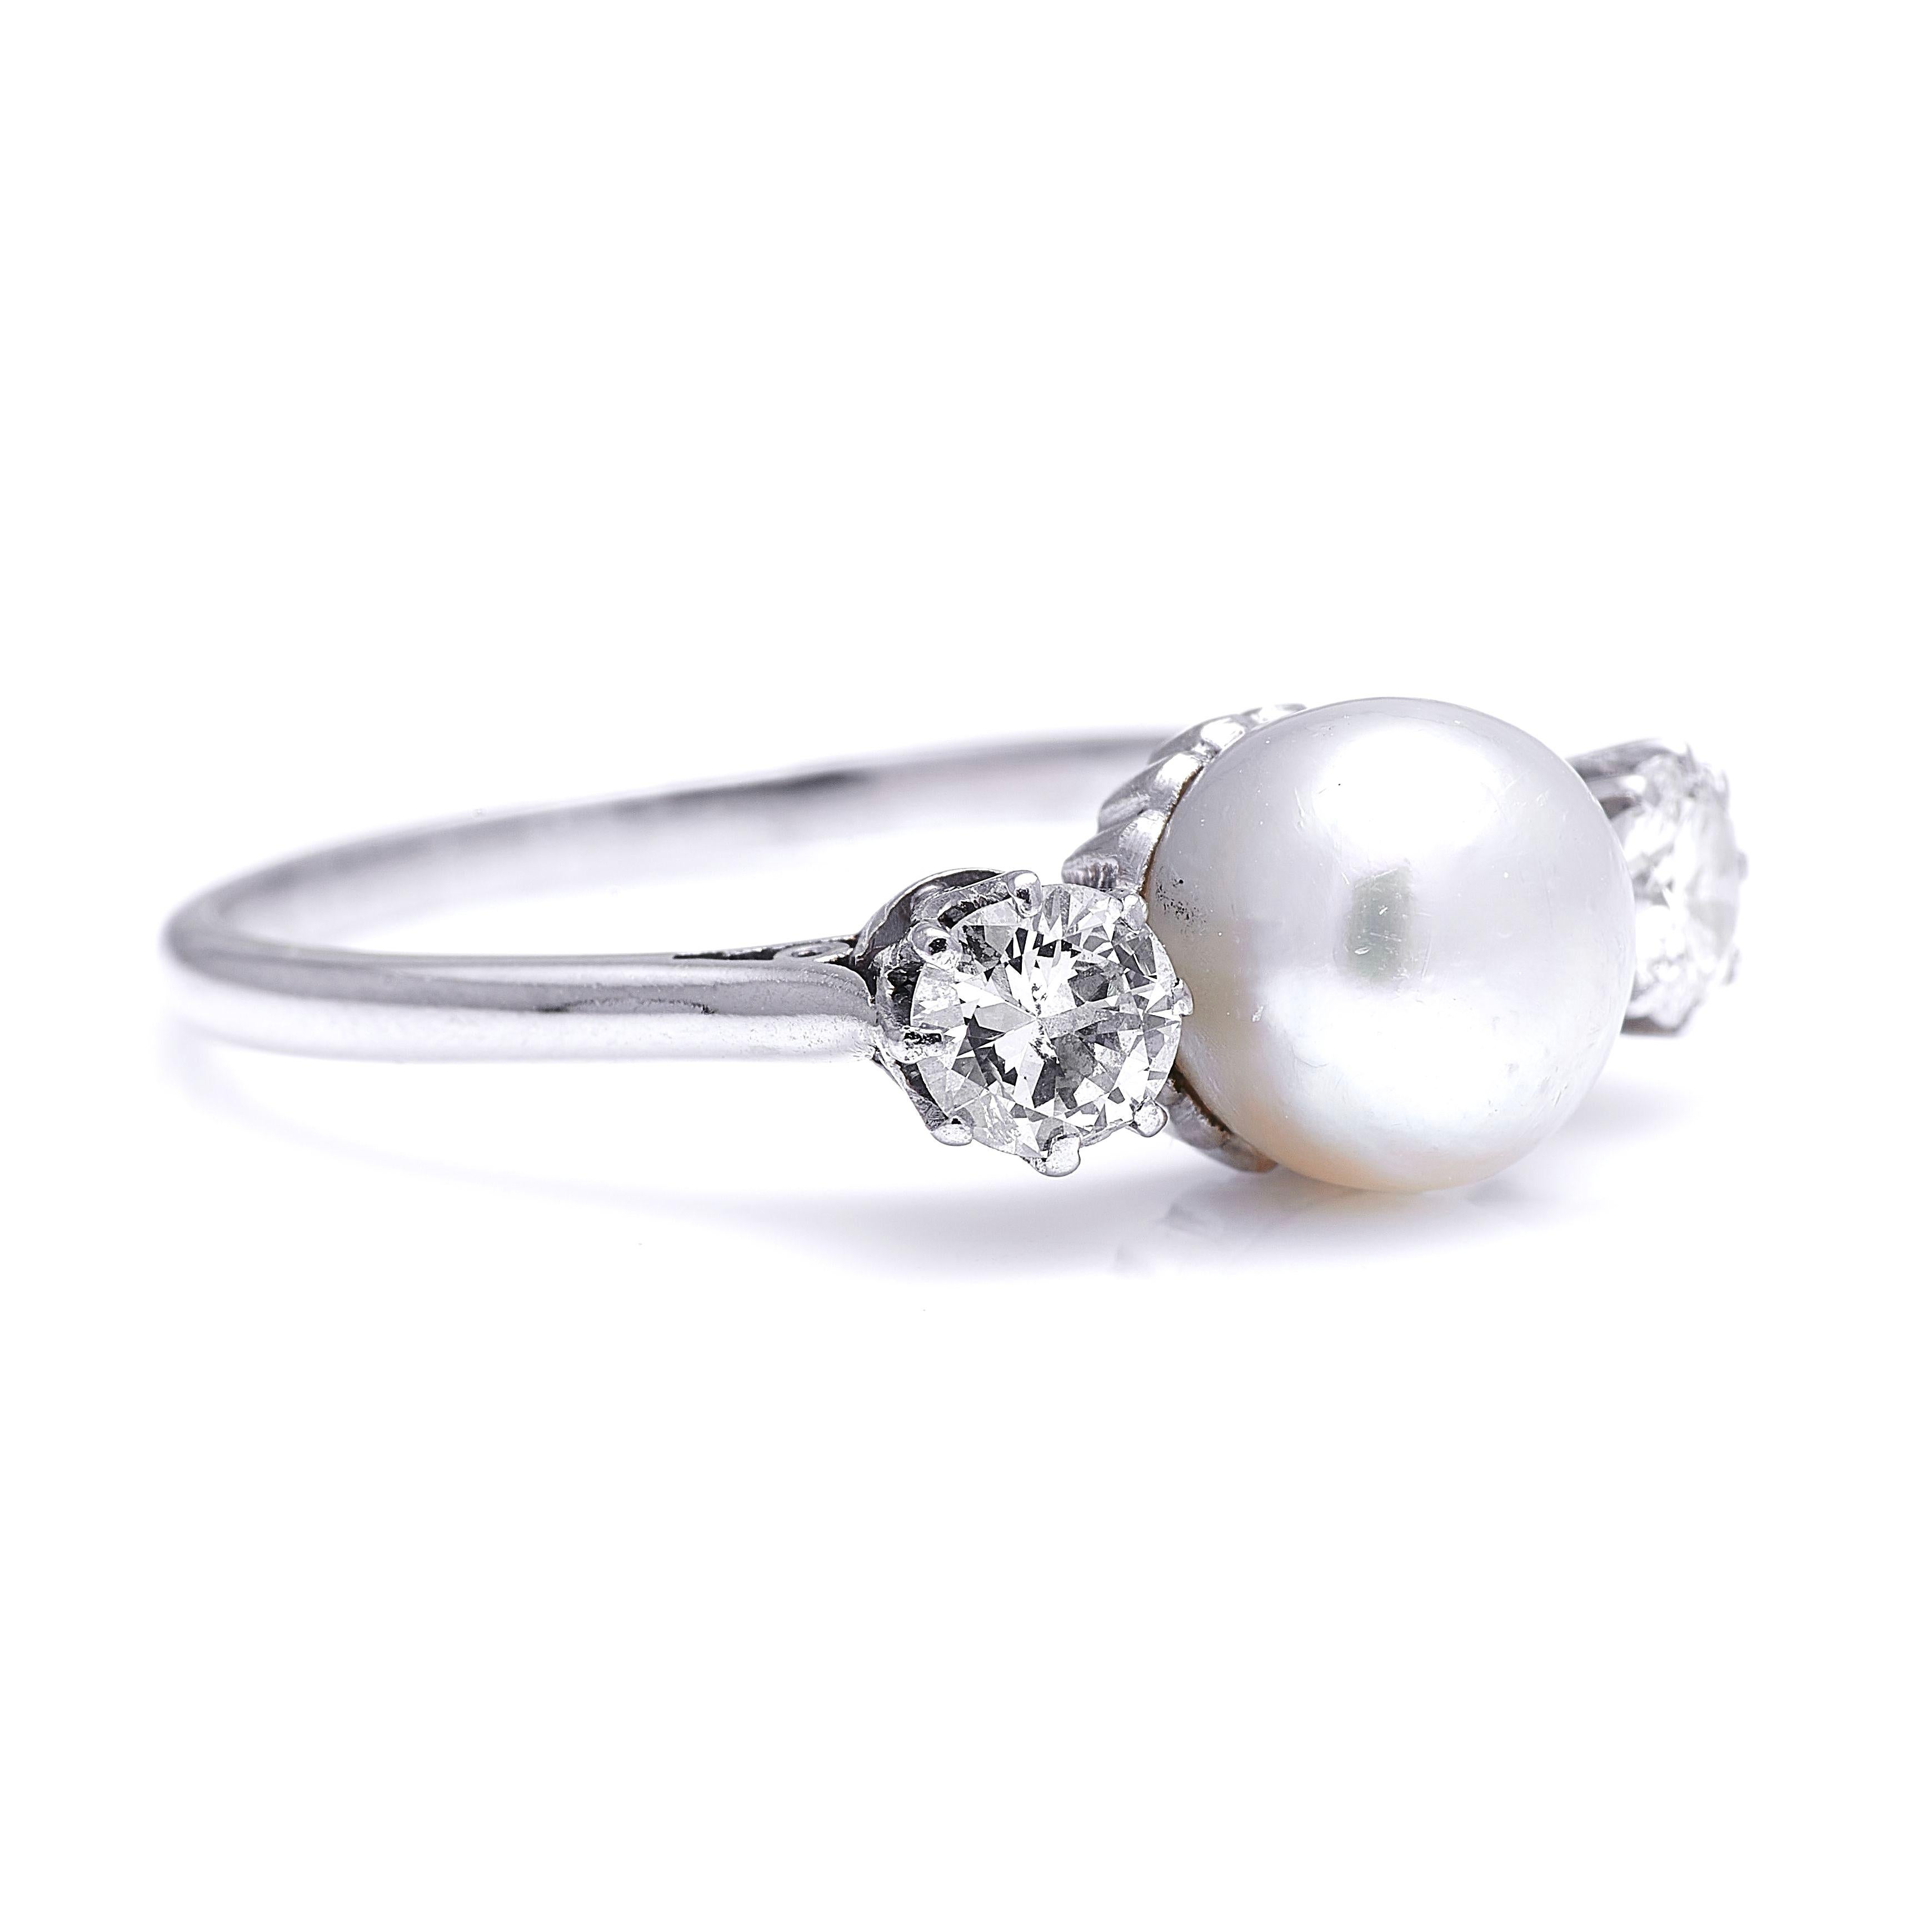 Natural pearl and diamond ring, 1900. The pearl in this ring is a rare natural saltwater pearl, of exceptional quality – a regular shape, with a beautiful, even surface with a bright, colourful lustre. Natural pearls by their very nature cannot be